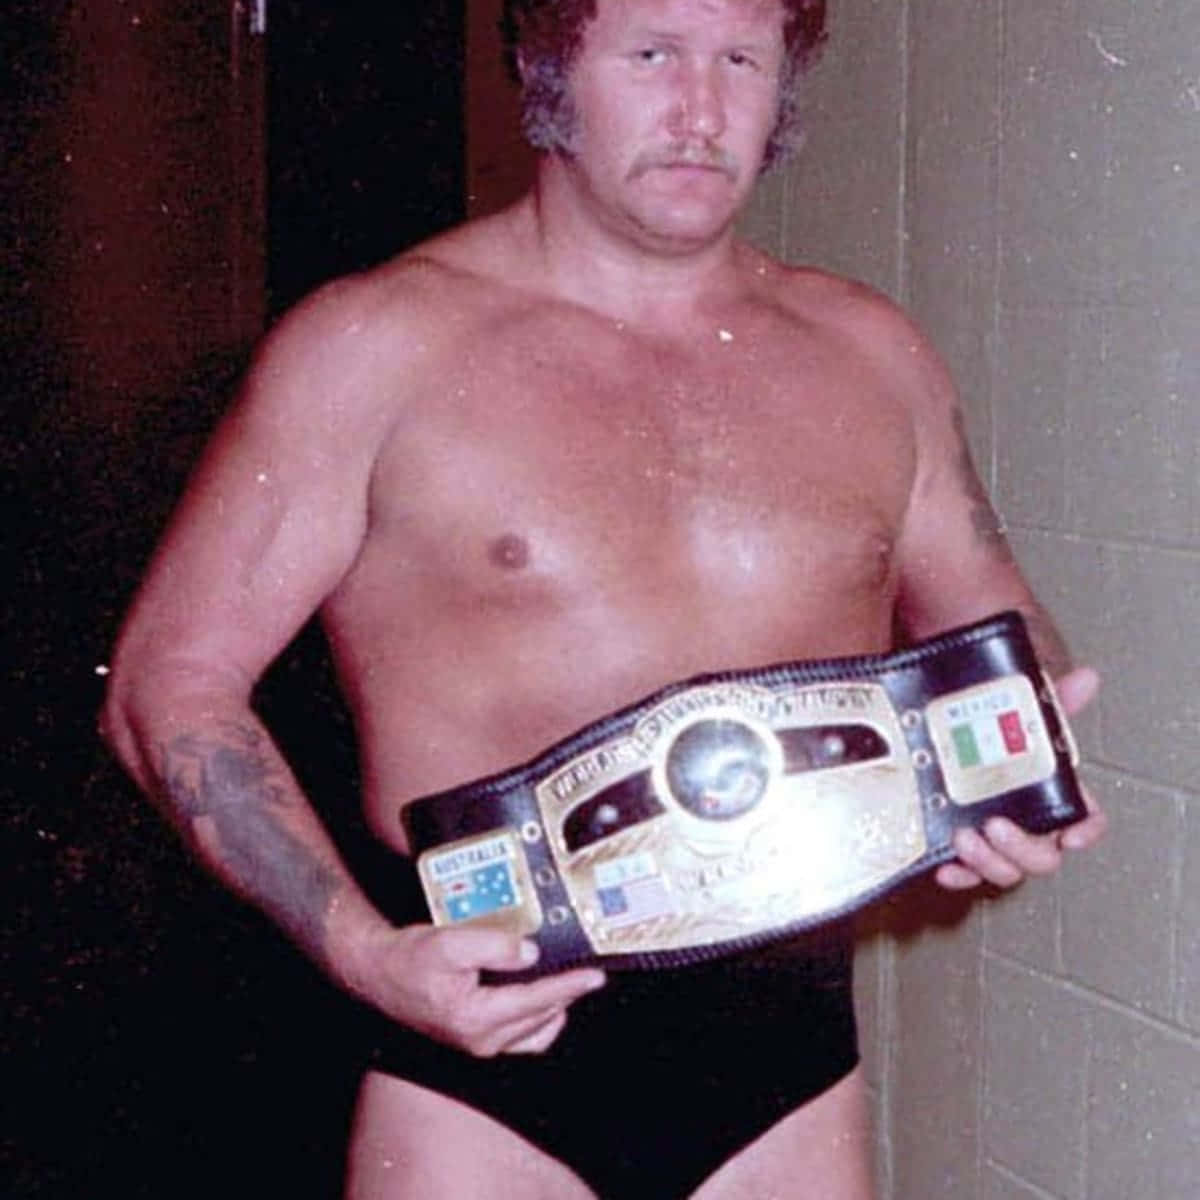 Harley Race proudly displaying the NWA Championship belt Wallpaper